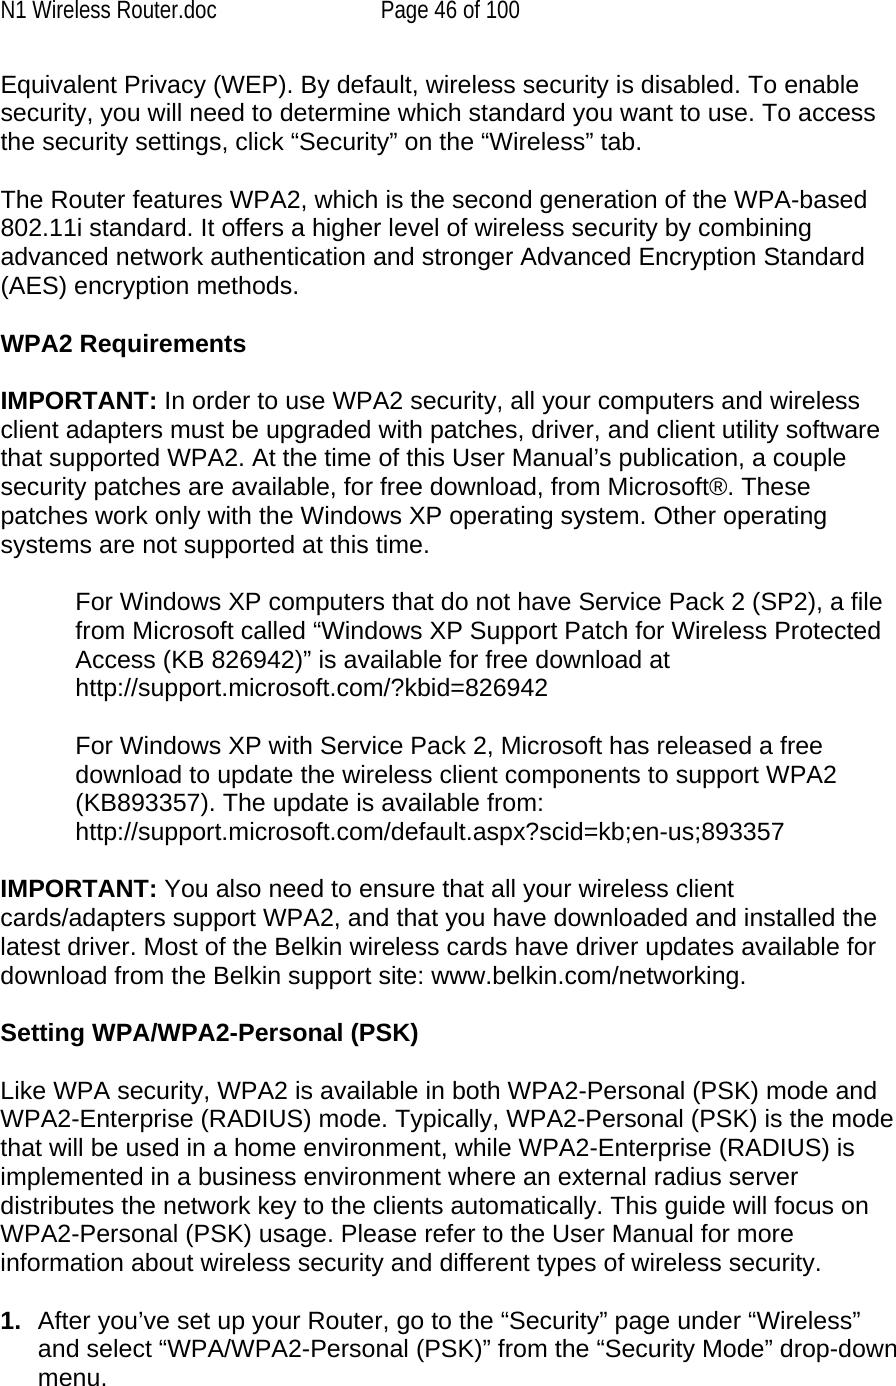 N1 Wireless Router.doc  Page 46 of 100 Equivalent Privacy (WEP). By default, wireless security is disabled. To enable security, you will need to determine which standard you want to use. To access the security settings, click “Security” on the “Wireless” tab.  The Router features WPA2, which is the second generation of the WPA-based 802.11i standard. It offers a higher level of wireless security by combining advanced network authentication and stronger Advanced Encryption Standard (AES) encryption methods.  WPA2 Requirements  IMPORTANT: In order to use WPA2 security, all your computers and wireless client adapters must be upgraded with patches, driver, and client utility software that supported WPA2. At the time of this User Manual’s publication, a couple security patches are available, for free download, from Microsoft®. These patches work only with the Windows XP operating system. Other operating systems are not supported at this time.   For Windows XP computers that do not have Service Pack 2 (SP2), a file from Microsoft called “Windows XP Support Patch for Wireless Protected Access (KB 826942)” is available for free download at http://support.microsoft.com/?kbid=826942  For Windows XP with Service Pack 2, Microsoft has released a free download to update the wireless client components to support WPA2 (KB893357). The update is available from: http://support.microsoft.com/default.aspx?scid=kb;en-us;893357  IMPORTANT: You also need to ensure that all your wireless client cards/adapters support WPA2, and that you have downloaded and installed the latest driver. Most of the Belkin wireless cards have driver updates available for download from the Belkin support site: www.belkin.com/networking.    Setting WPA/WPA2-Personal (PSK)    Like WPA security, WPA2 is available in both WPA2-Personal (PSK) mode and WPA2-Enterprise (RADIUS) mode. Typically, WPA2-Personal (PSK) is the mode that will be used in a home environment, while WPA2-Enterprise (RADIUS) is implemented in a business environment where an external radius server distributes the network key to the clients automatically. This guide will focus on WPA2-Personal (PSK) usage. Please refer to the User Manual for more information about wireless security and different types of wireless security.  1.  After you’ve set up your Router, go to the “Security” page under “Wireless” and select “WPA/WPA2-Personal (PSK)” from the “Security Mode” drop-down menu.  